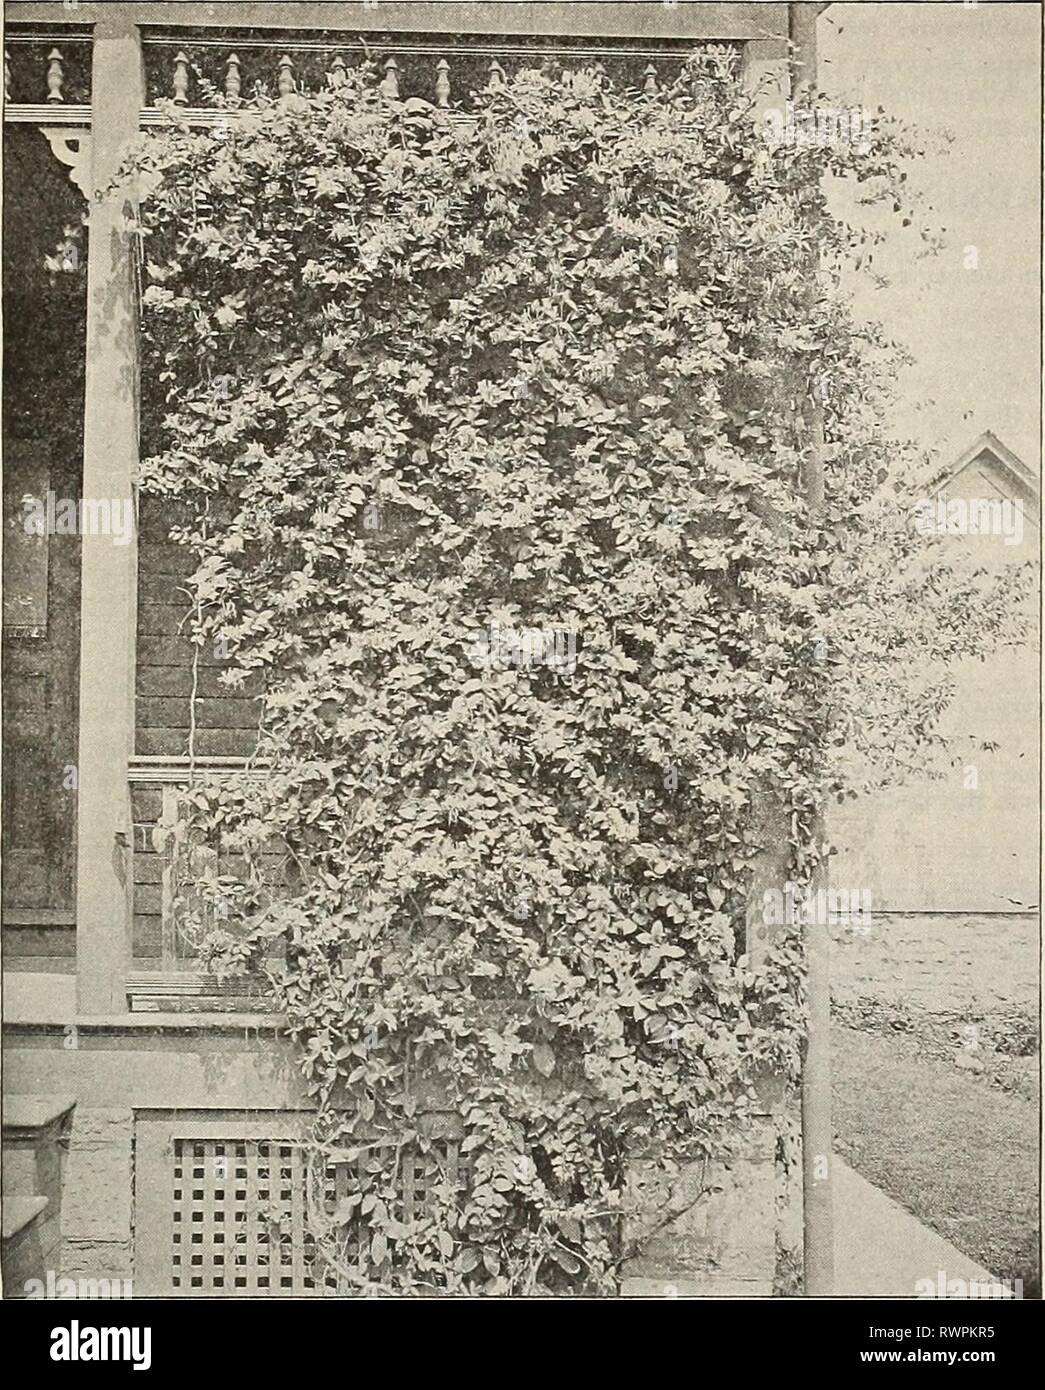 [Ellwanger & Barry's general catalogue] [Ellwanger & Barry's general catalogue] ellwangerbarrysg1896moun Year: 1896  OENEBAL CATALOGUE. 107    Hall's Honeysuckle. Clematis Henryi. (Andeison-Heniy.) Very large, fine form; free grower and bloomer ; creamy white. Sl.OO. C. Hybrida Sieboldii. Large, bright blue flowers; fine. $1.00. , C. riammula. European Sweet Clematls. Flowers small, white and very fragrant. 50c. ^ , O. Jackmanni. (Jackman.) Large, Intense violet purple ; remarkable for Us velvety richness ; free in growth and an abundant and successive bloomer. Sl.OO. , . , , „ . j , ^ la^^ C. Stock Photo